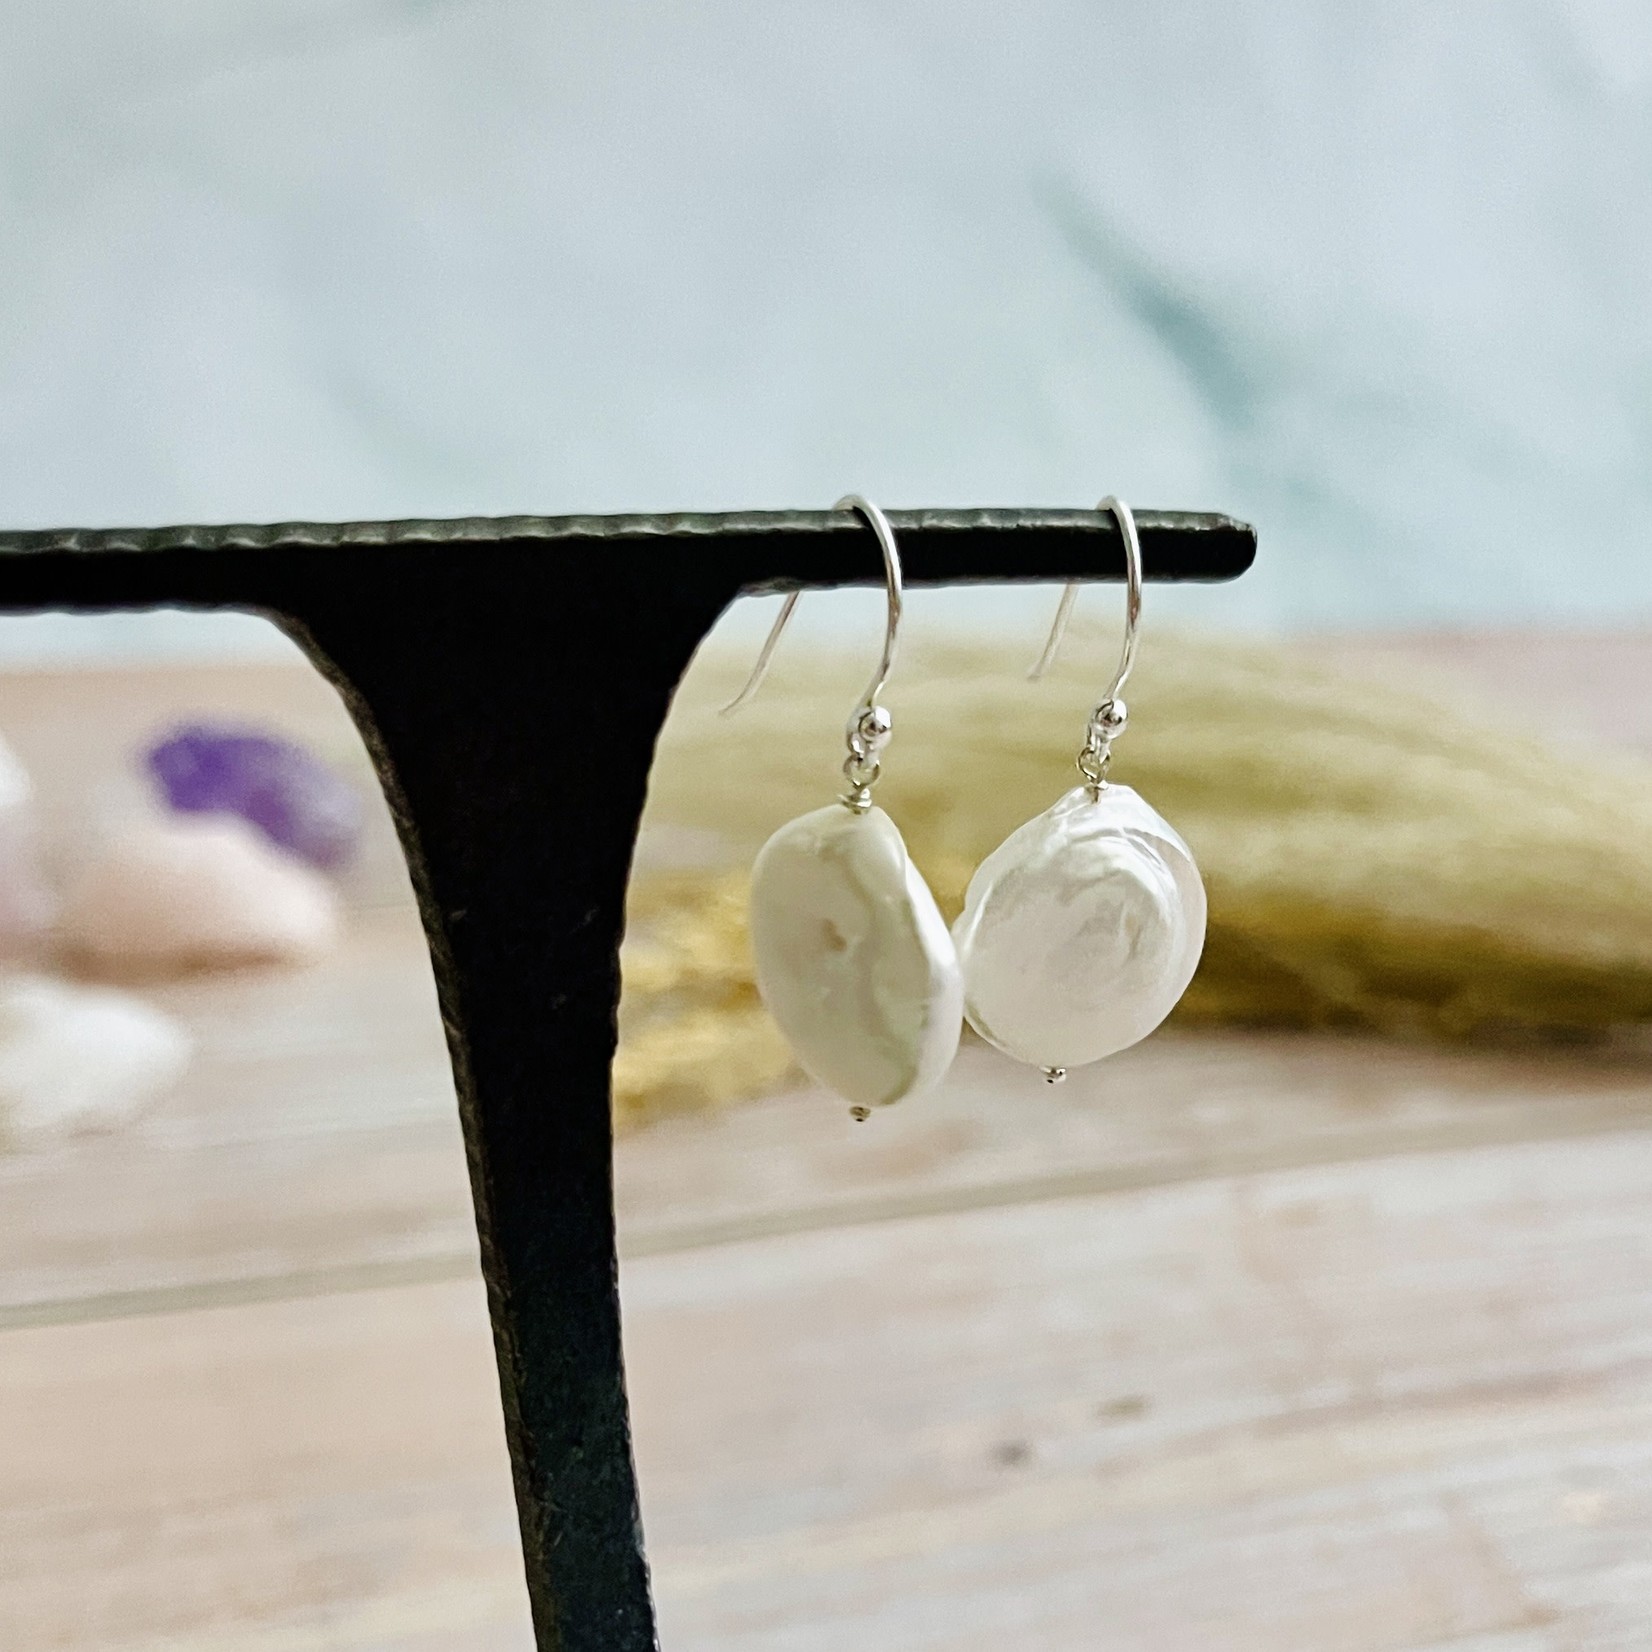 Handmade Silver Earrings with white coin pearl